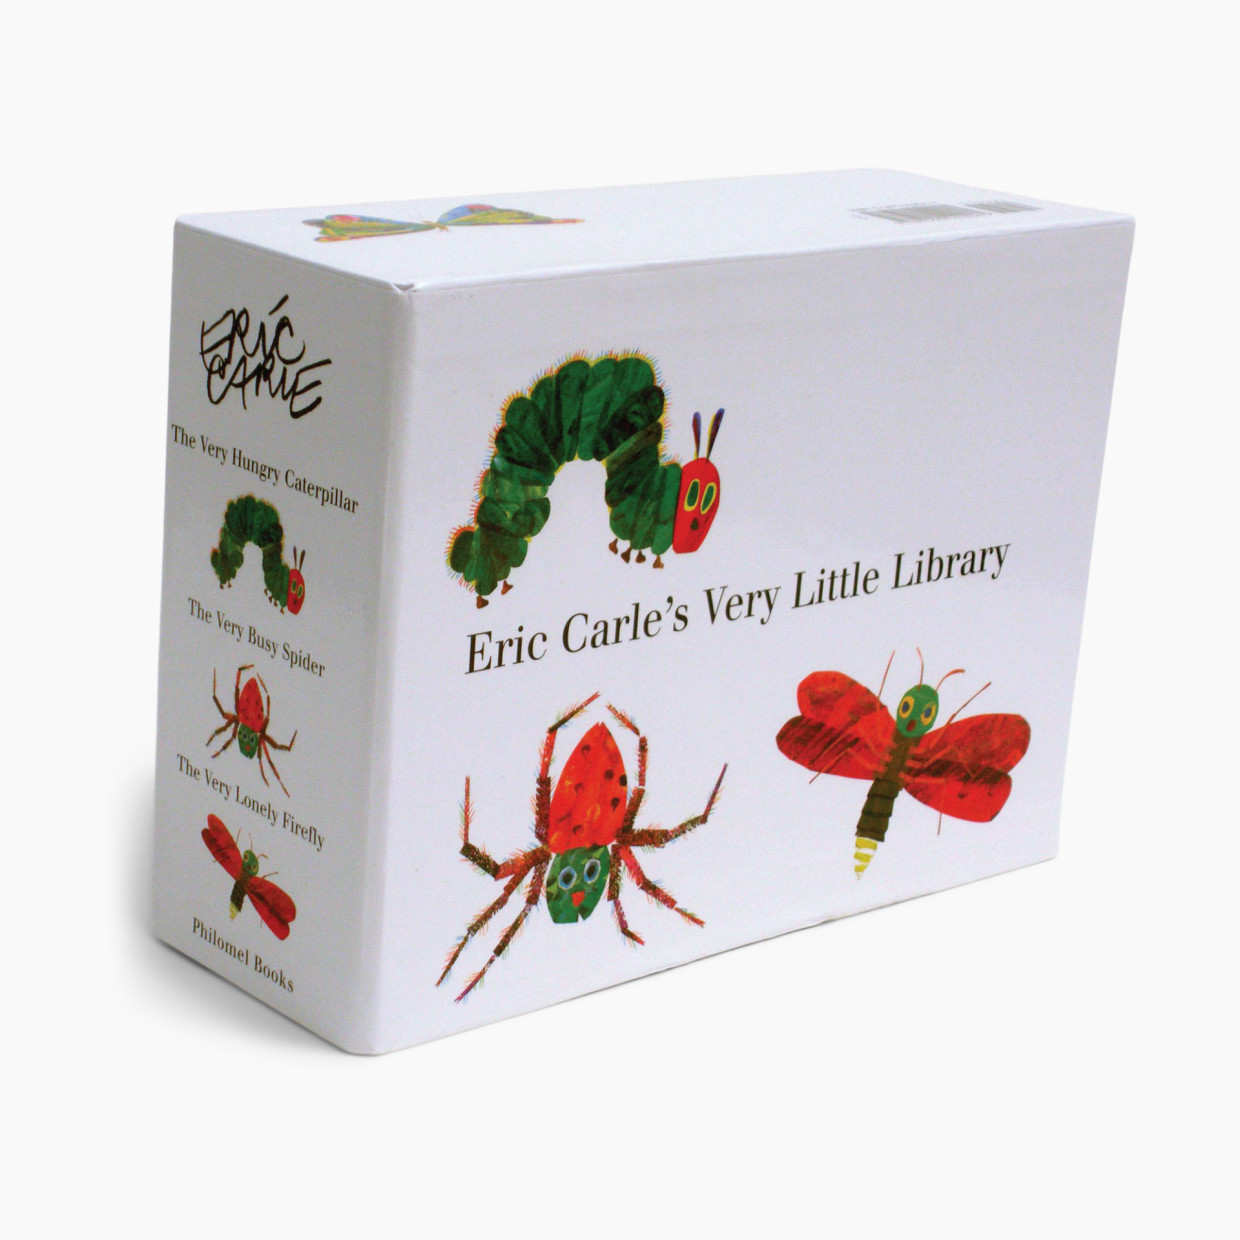 Eric Carle's Very Little Library.